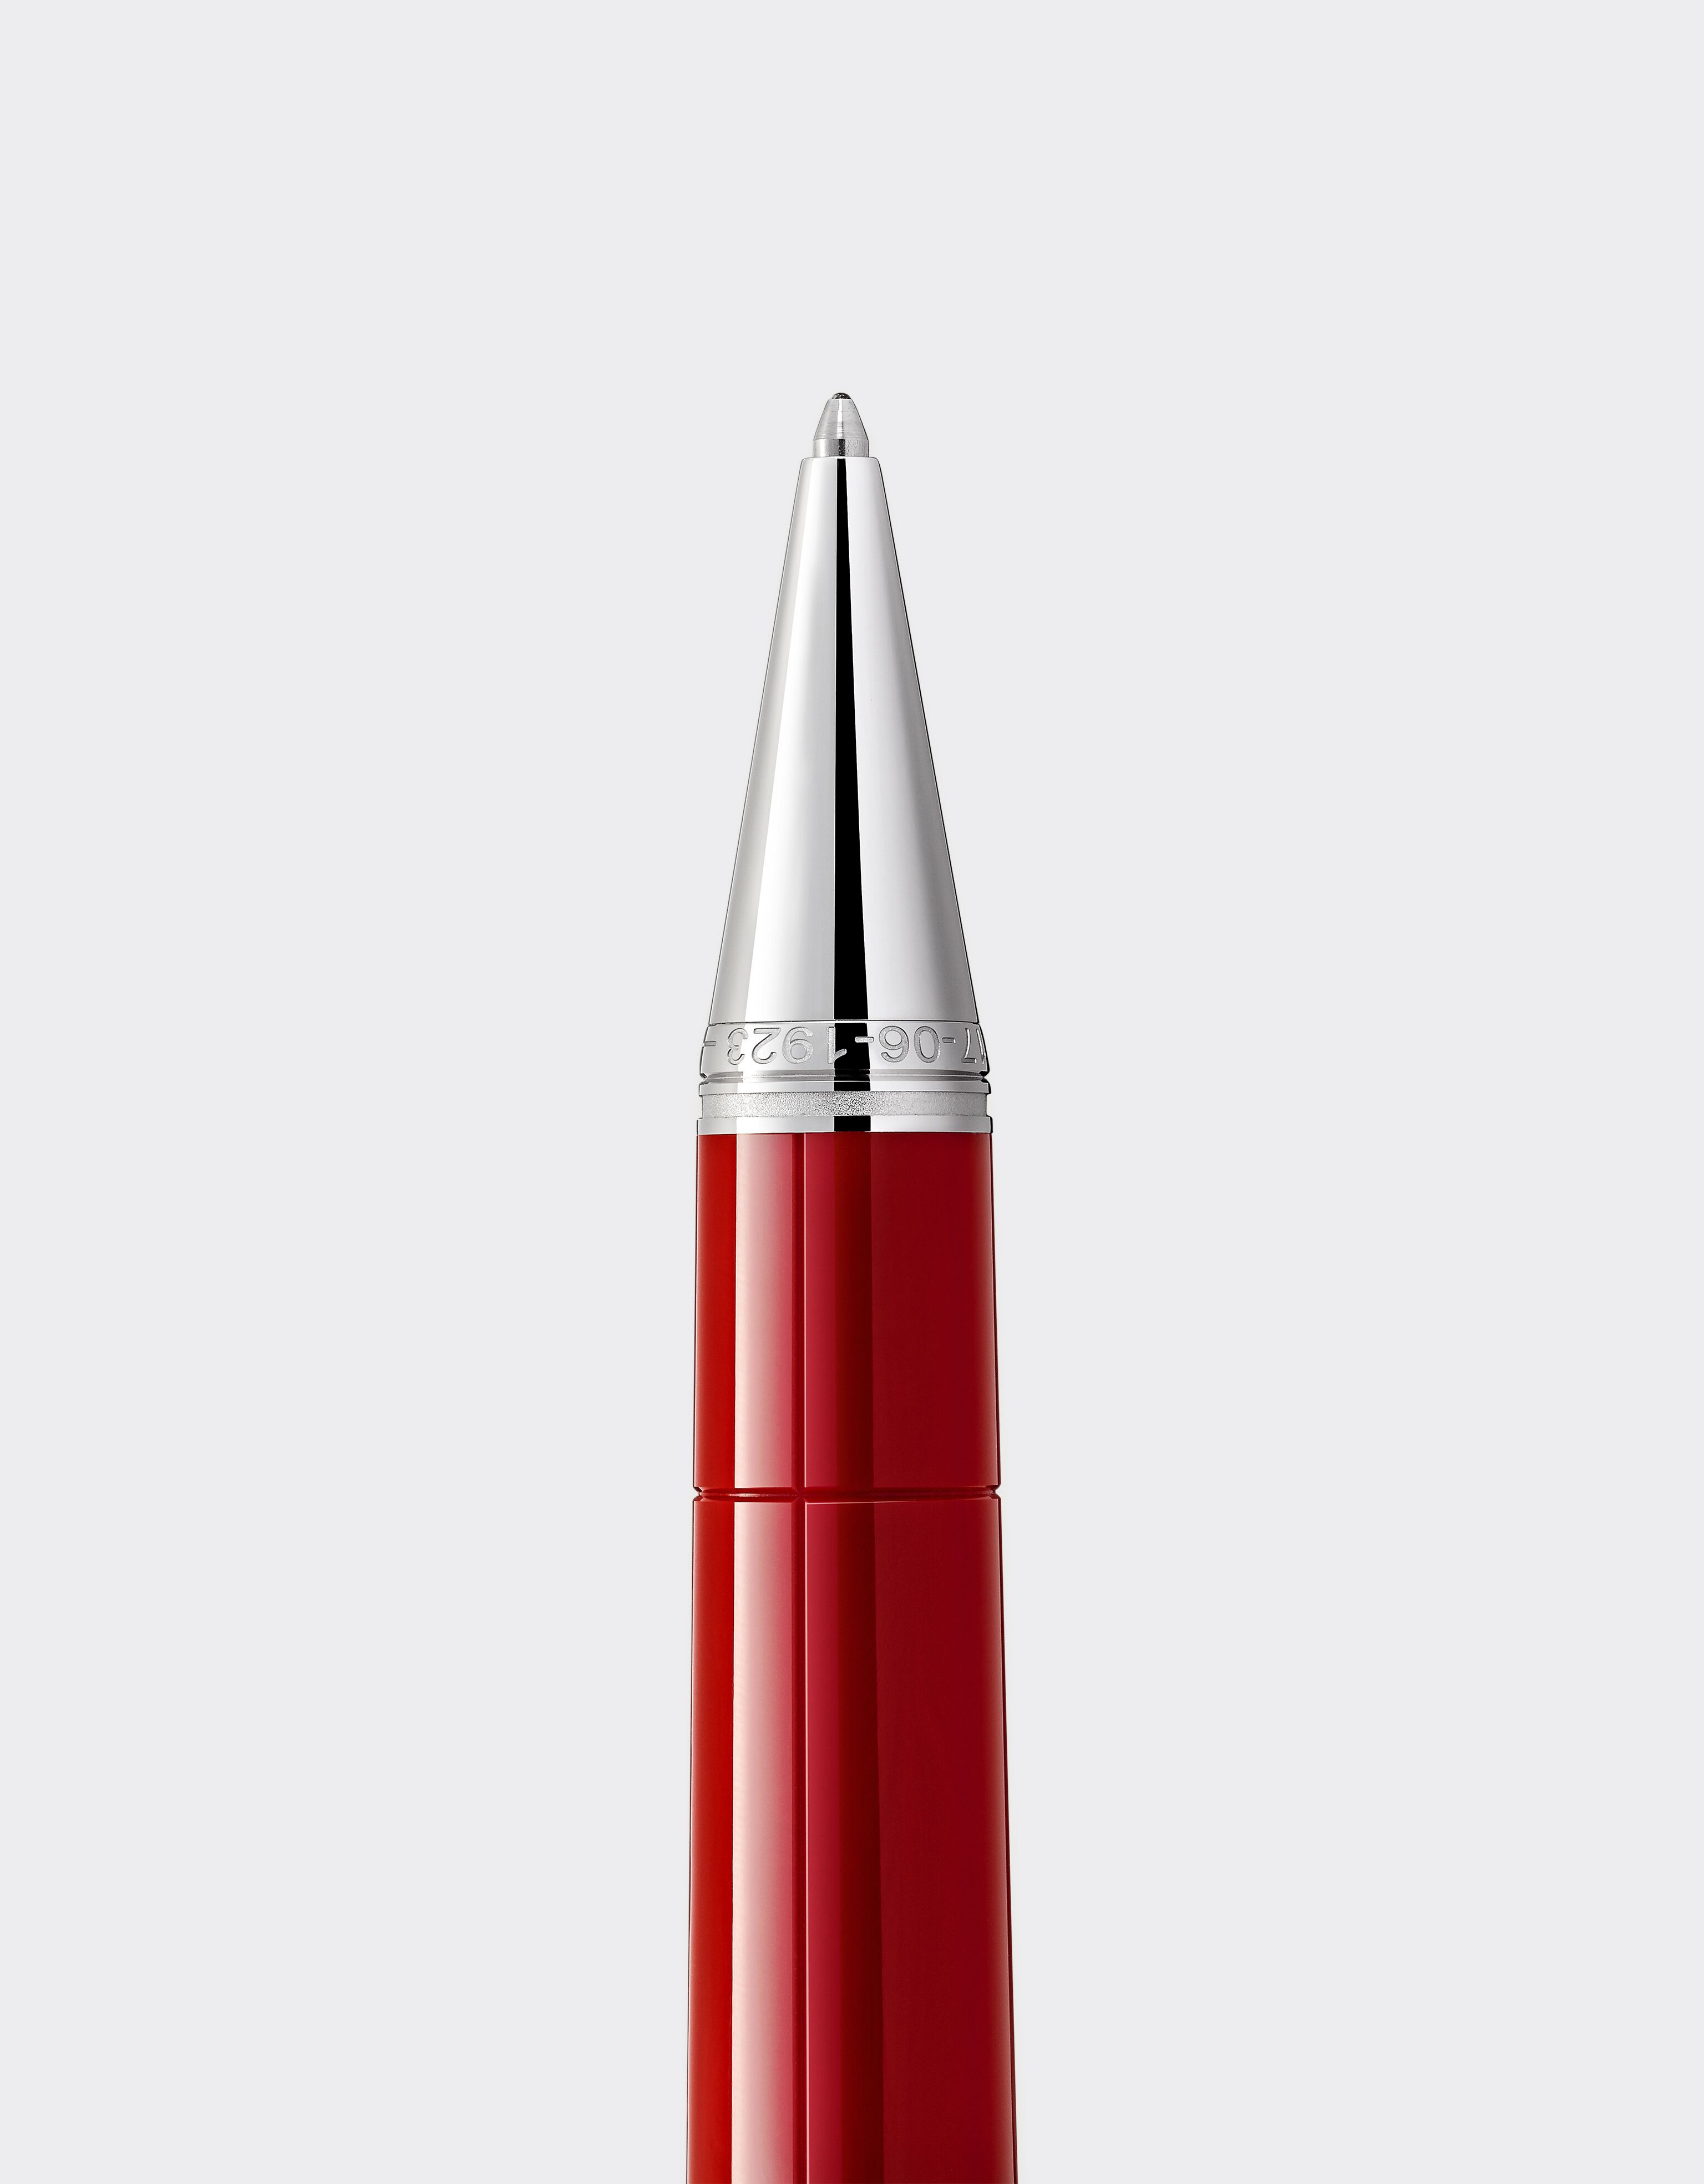 Ferrari Stylo à bille Montblanc Great Characters Enzo Ferrari Special Edition Rouge F0432f